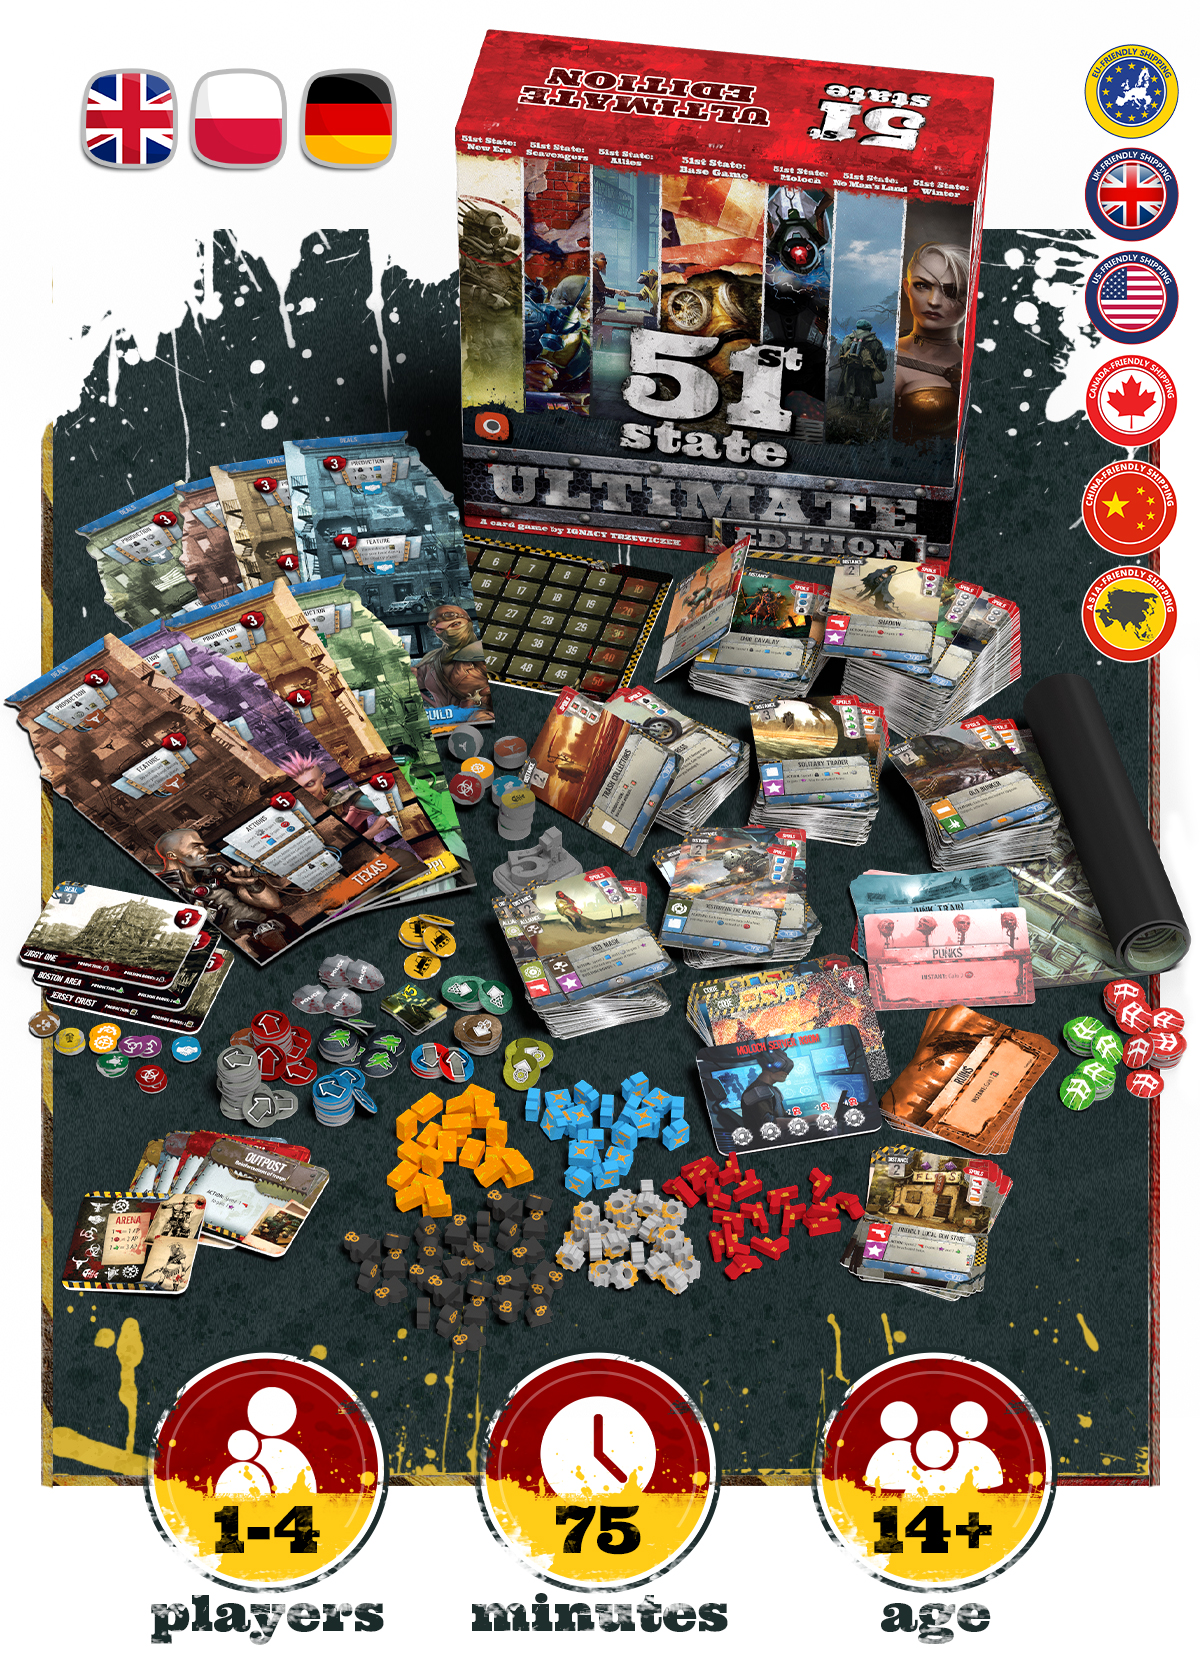 51st-state-ultimate-edition-by-portal-games-gamefound